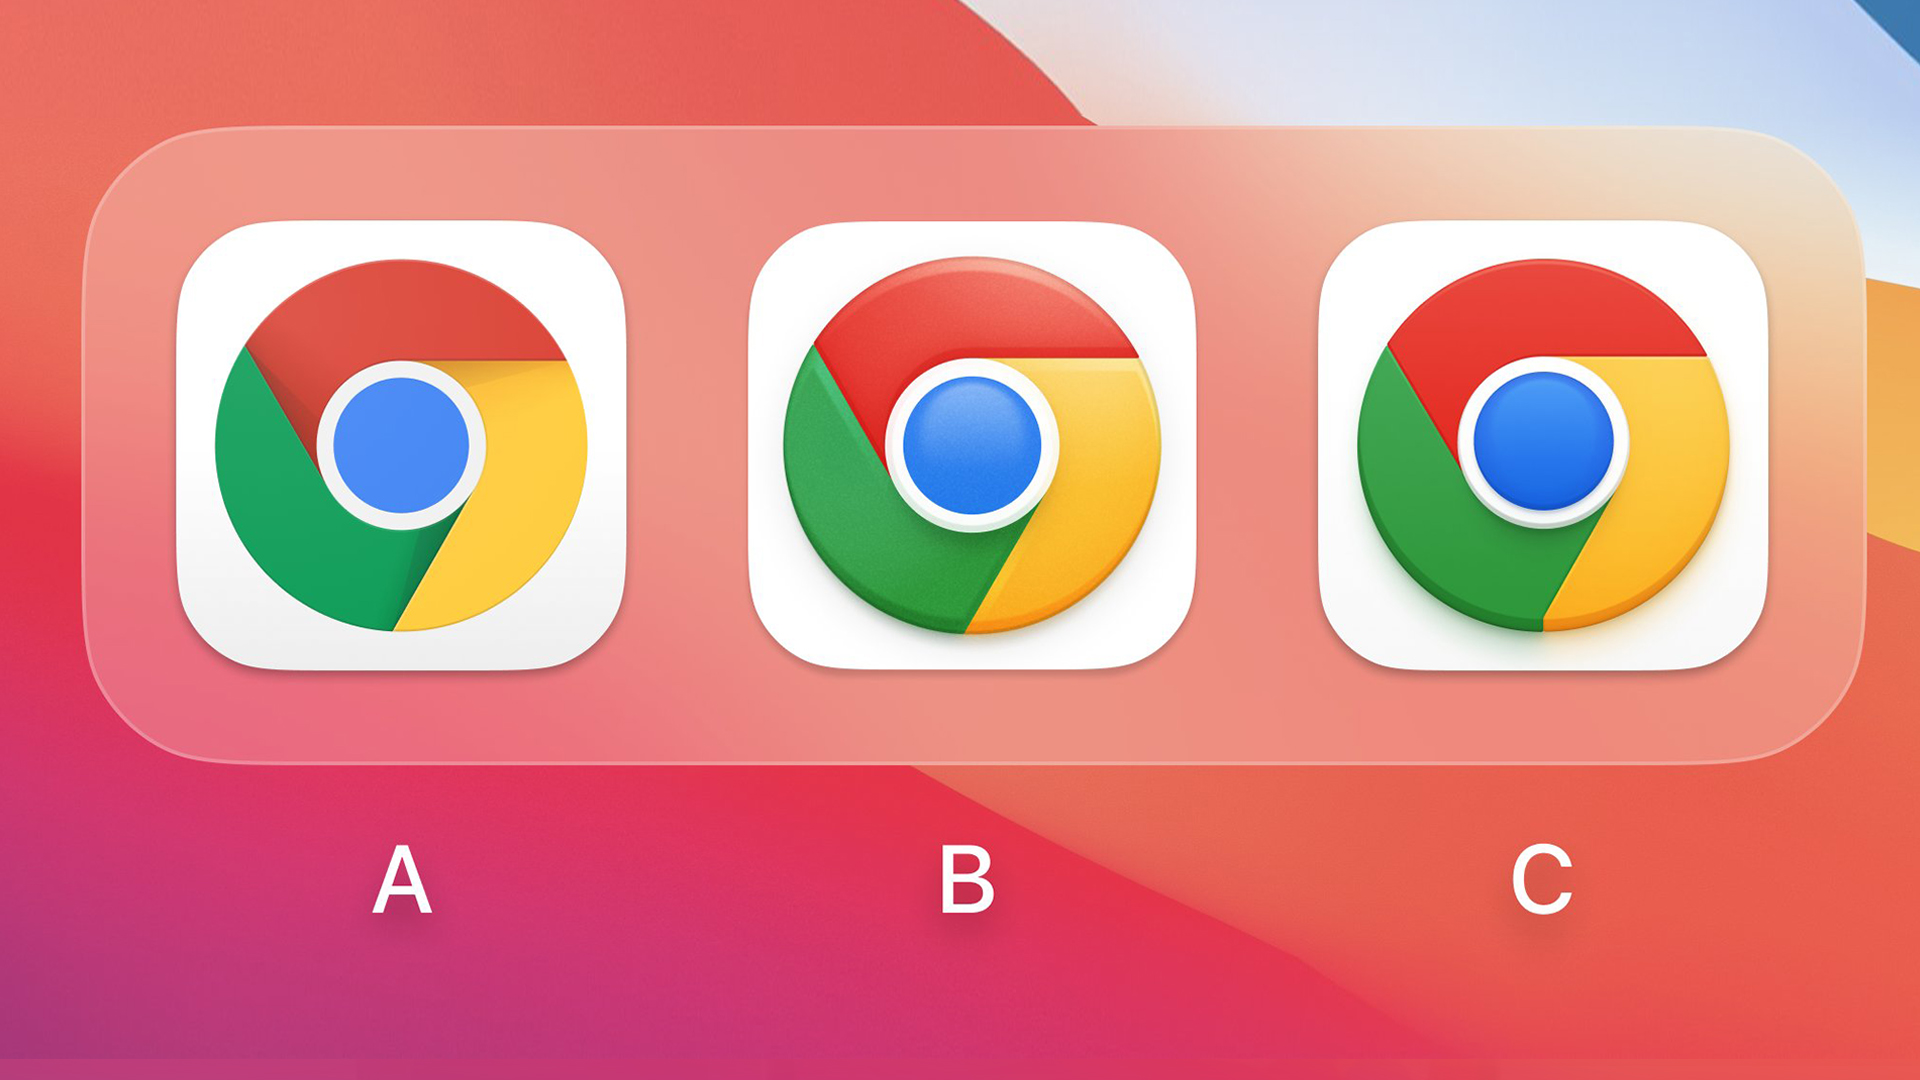 chrome for mac change the hyperlink color